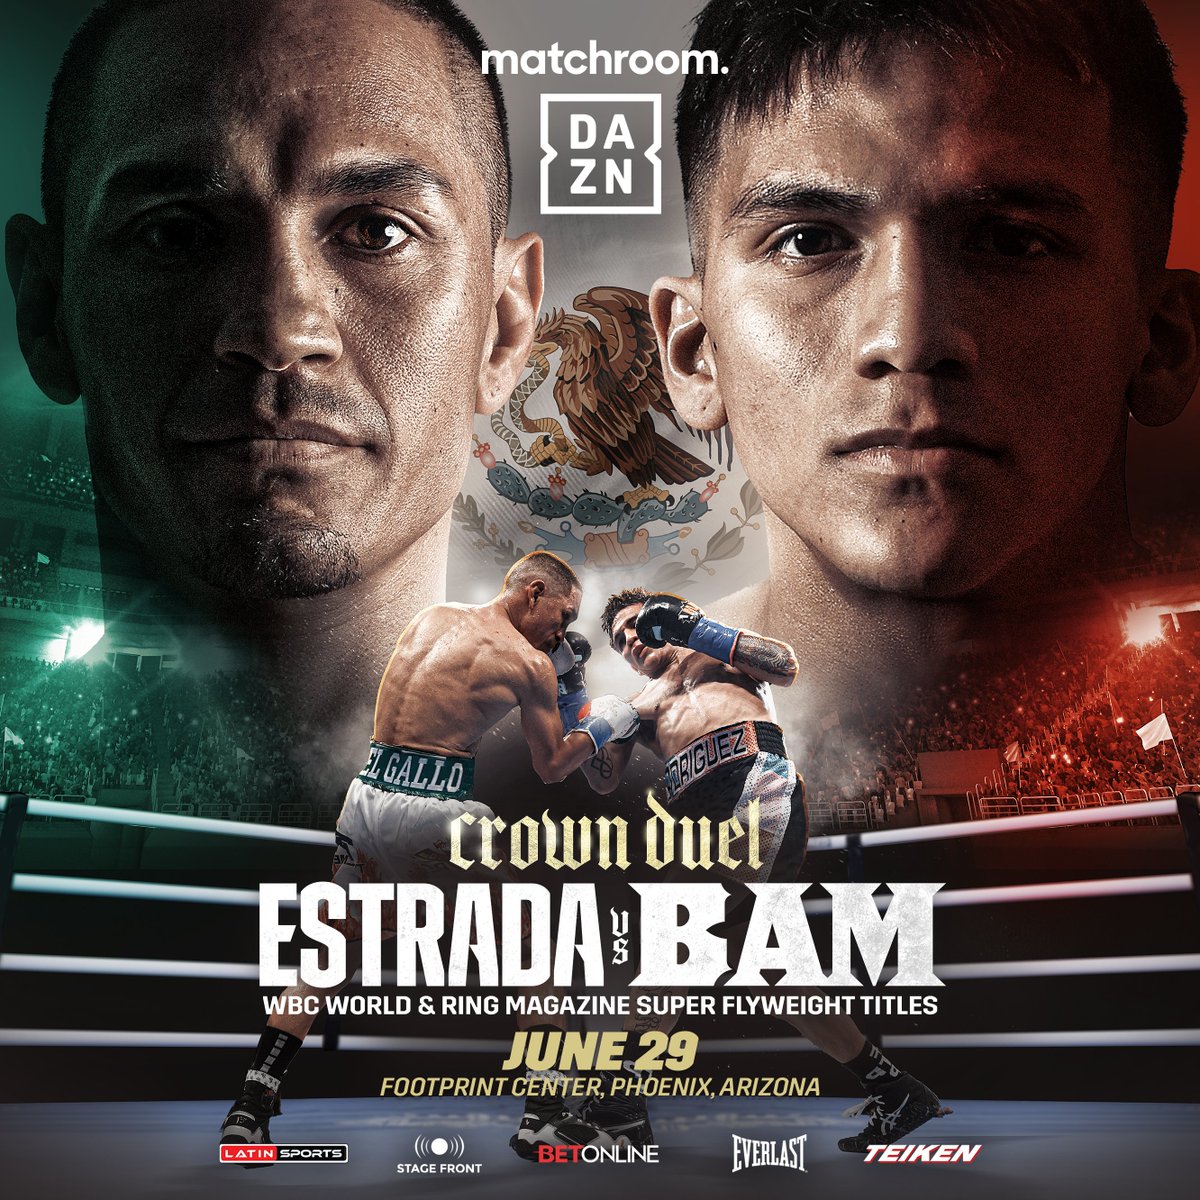 𝗟𝗘𝗚𝗔𝗖𝗬 𝗙𝗜𝗚𝗛𝗧 👑 @GalloEstradaOfi vs @210bam goes down for the WBC World & Ring Magazine Super Flyweight Titles 🔥 #EstradaBam live on @DAZNBoxing, Jun 29 from the @FootprintCNTR in Phoenix 👊